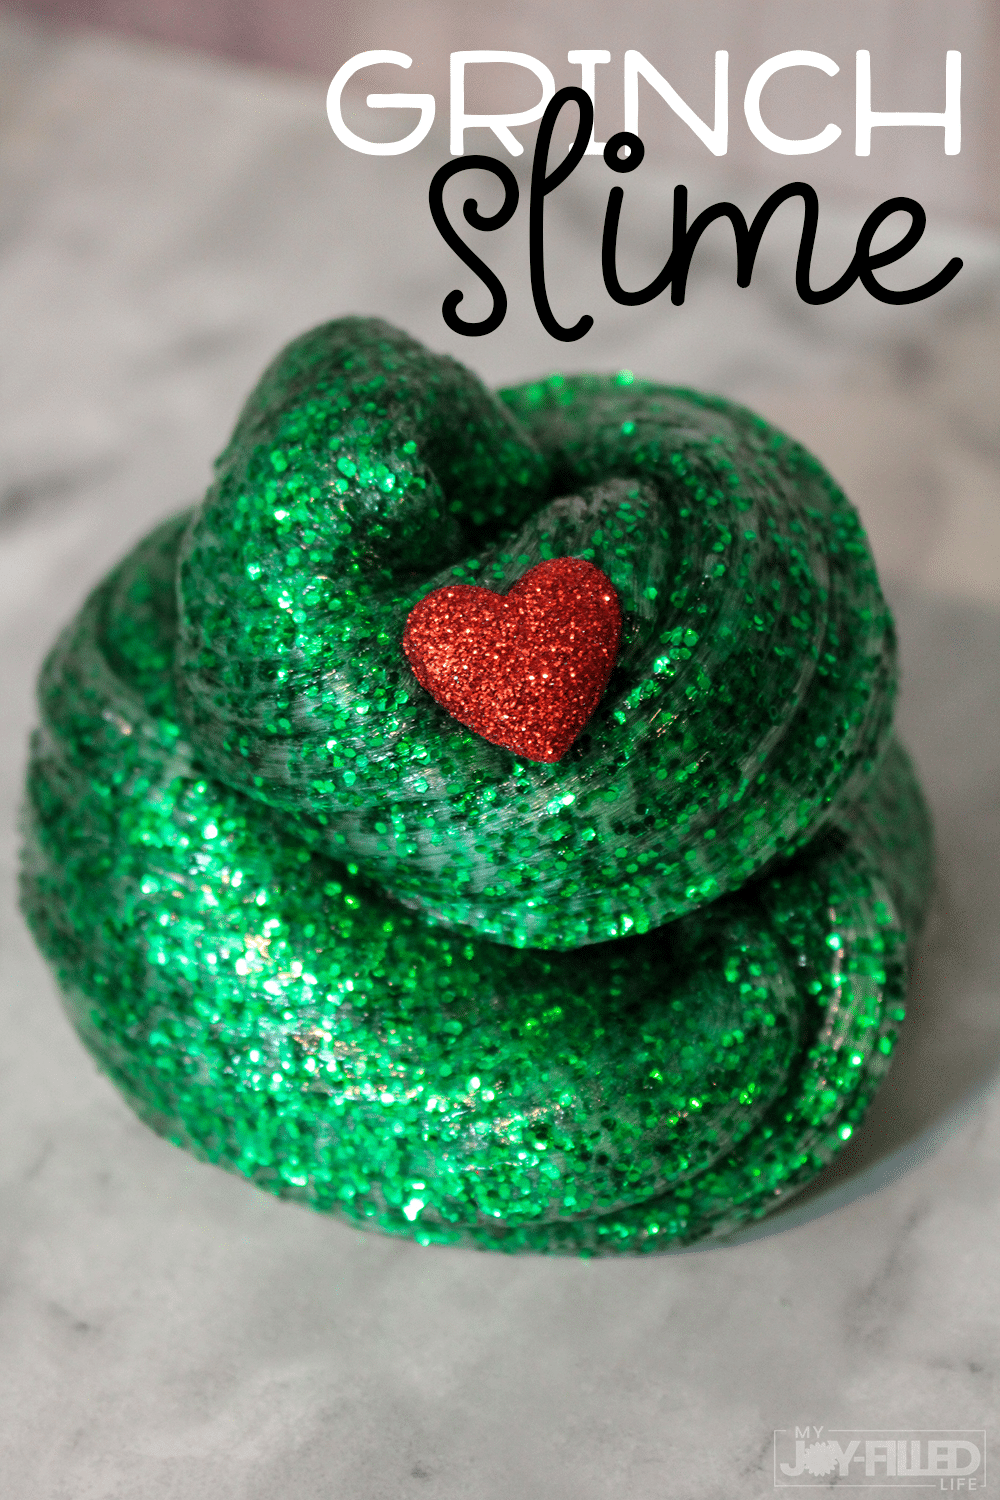 Kids will have a BLAST with this Grinch slime. It's the perfect slime recipe and super easy to make! #slime #thegrinch #grinch #grinchslime #christmas